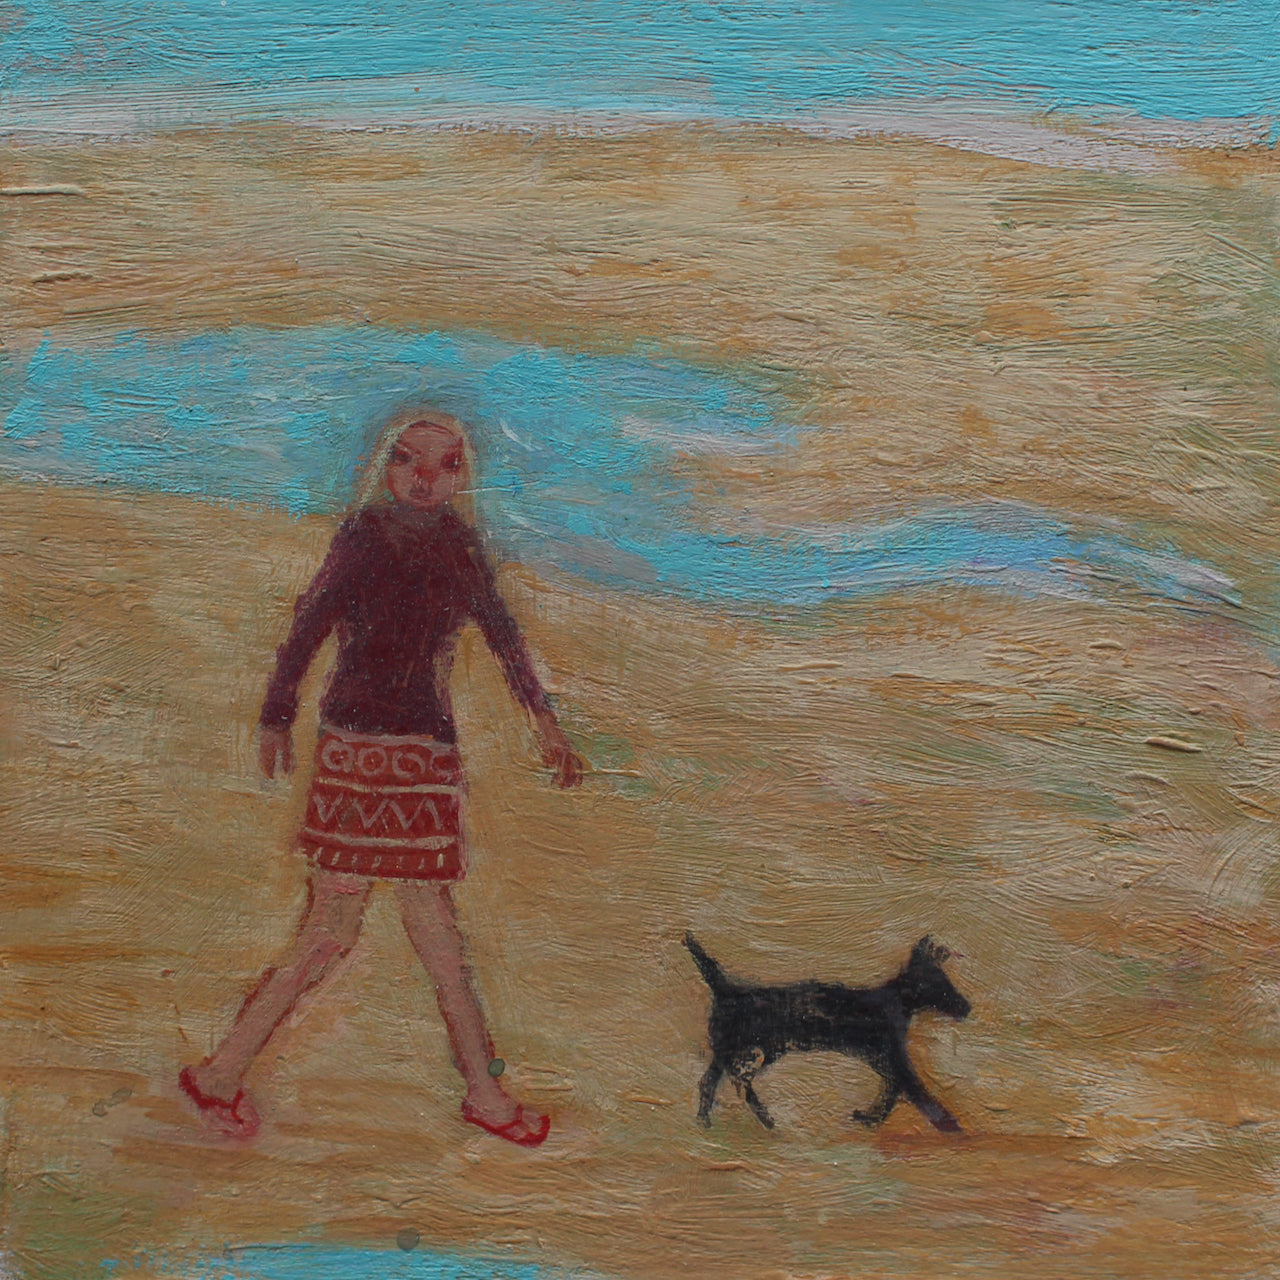 an oil painting by Cornish artist Siobhan Purdy of a woman with blonde hair walking a black dog on a beach.